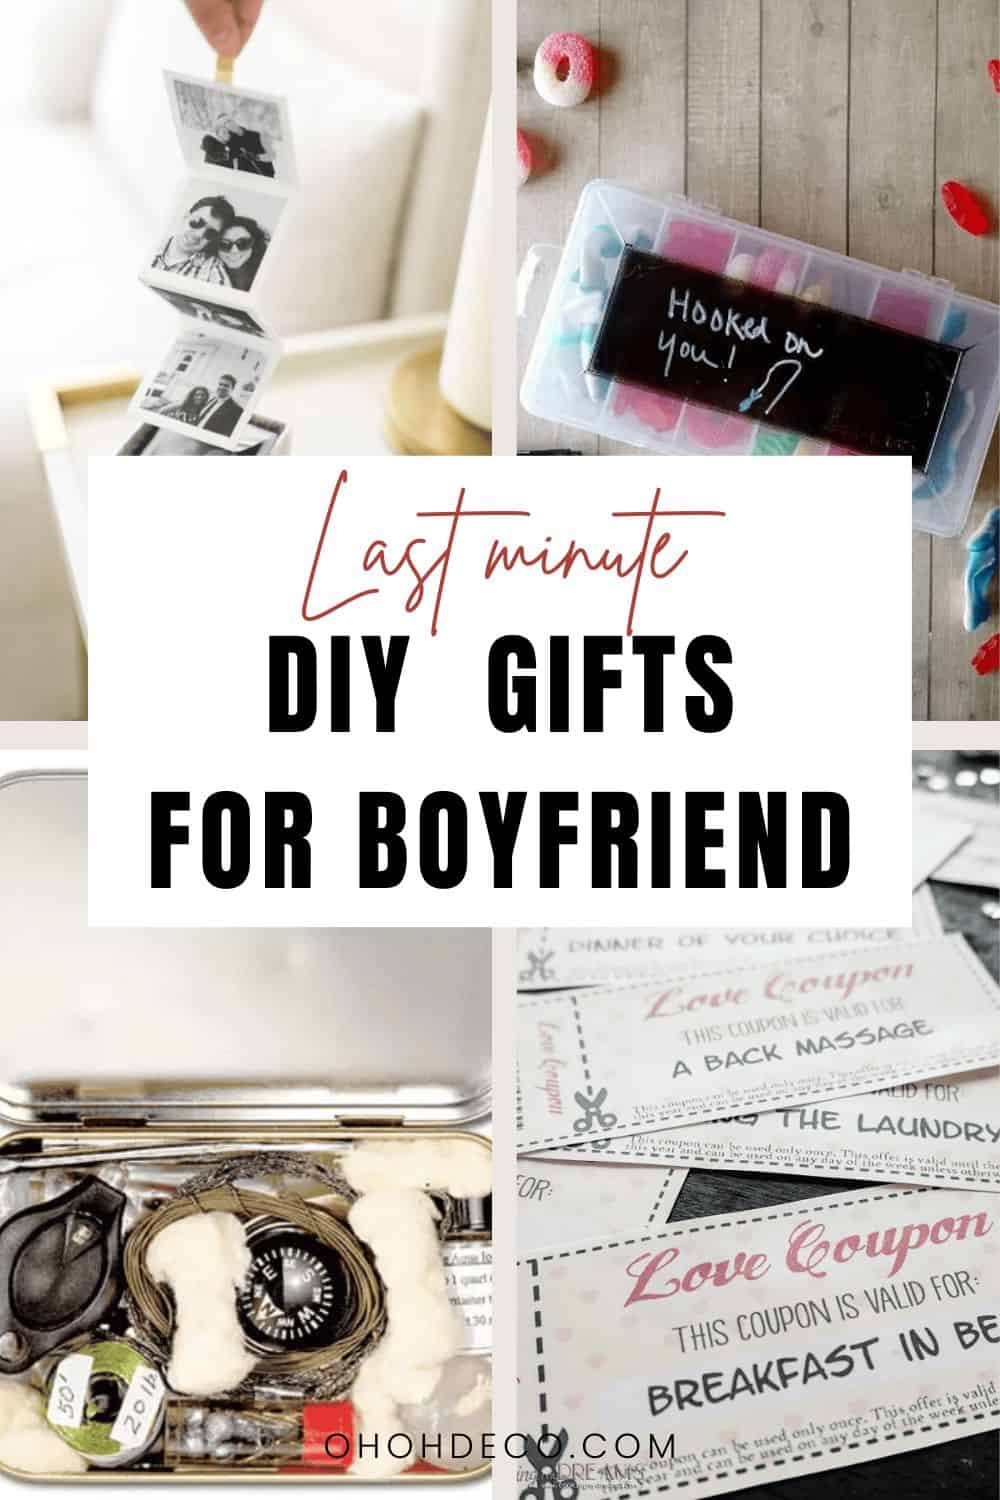 Pin by Hannah Belle on That's a good idea! | Valentines gifts for boyfriend,  Relationship gifts, Diy gifts for him